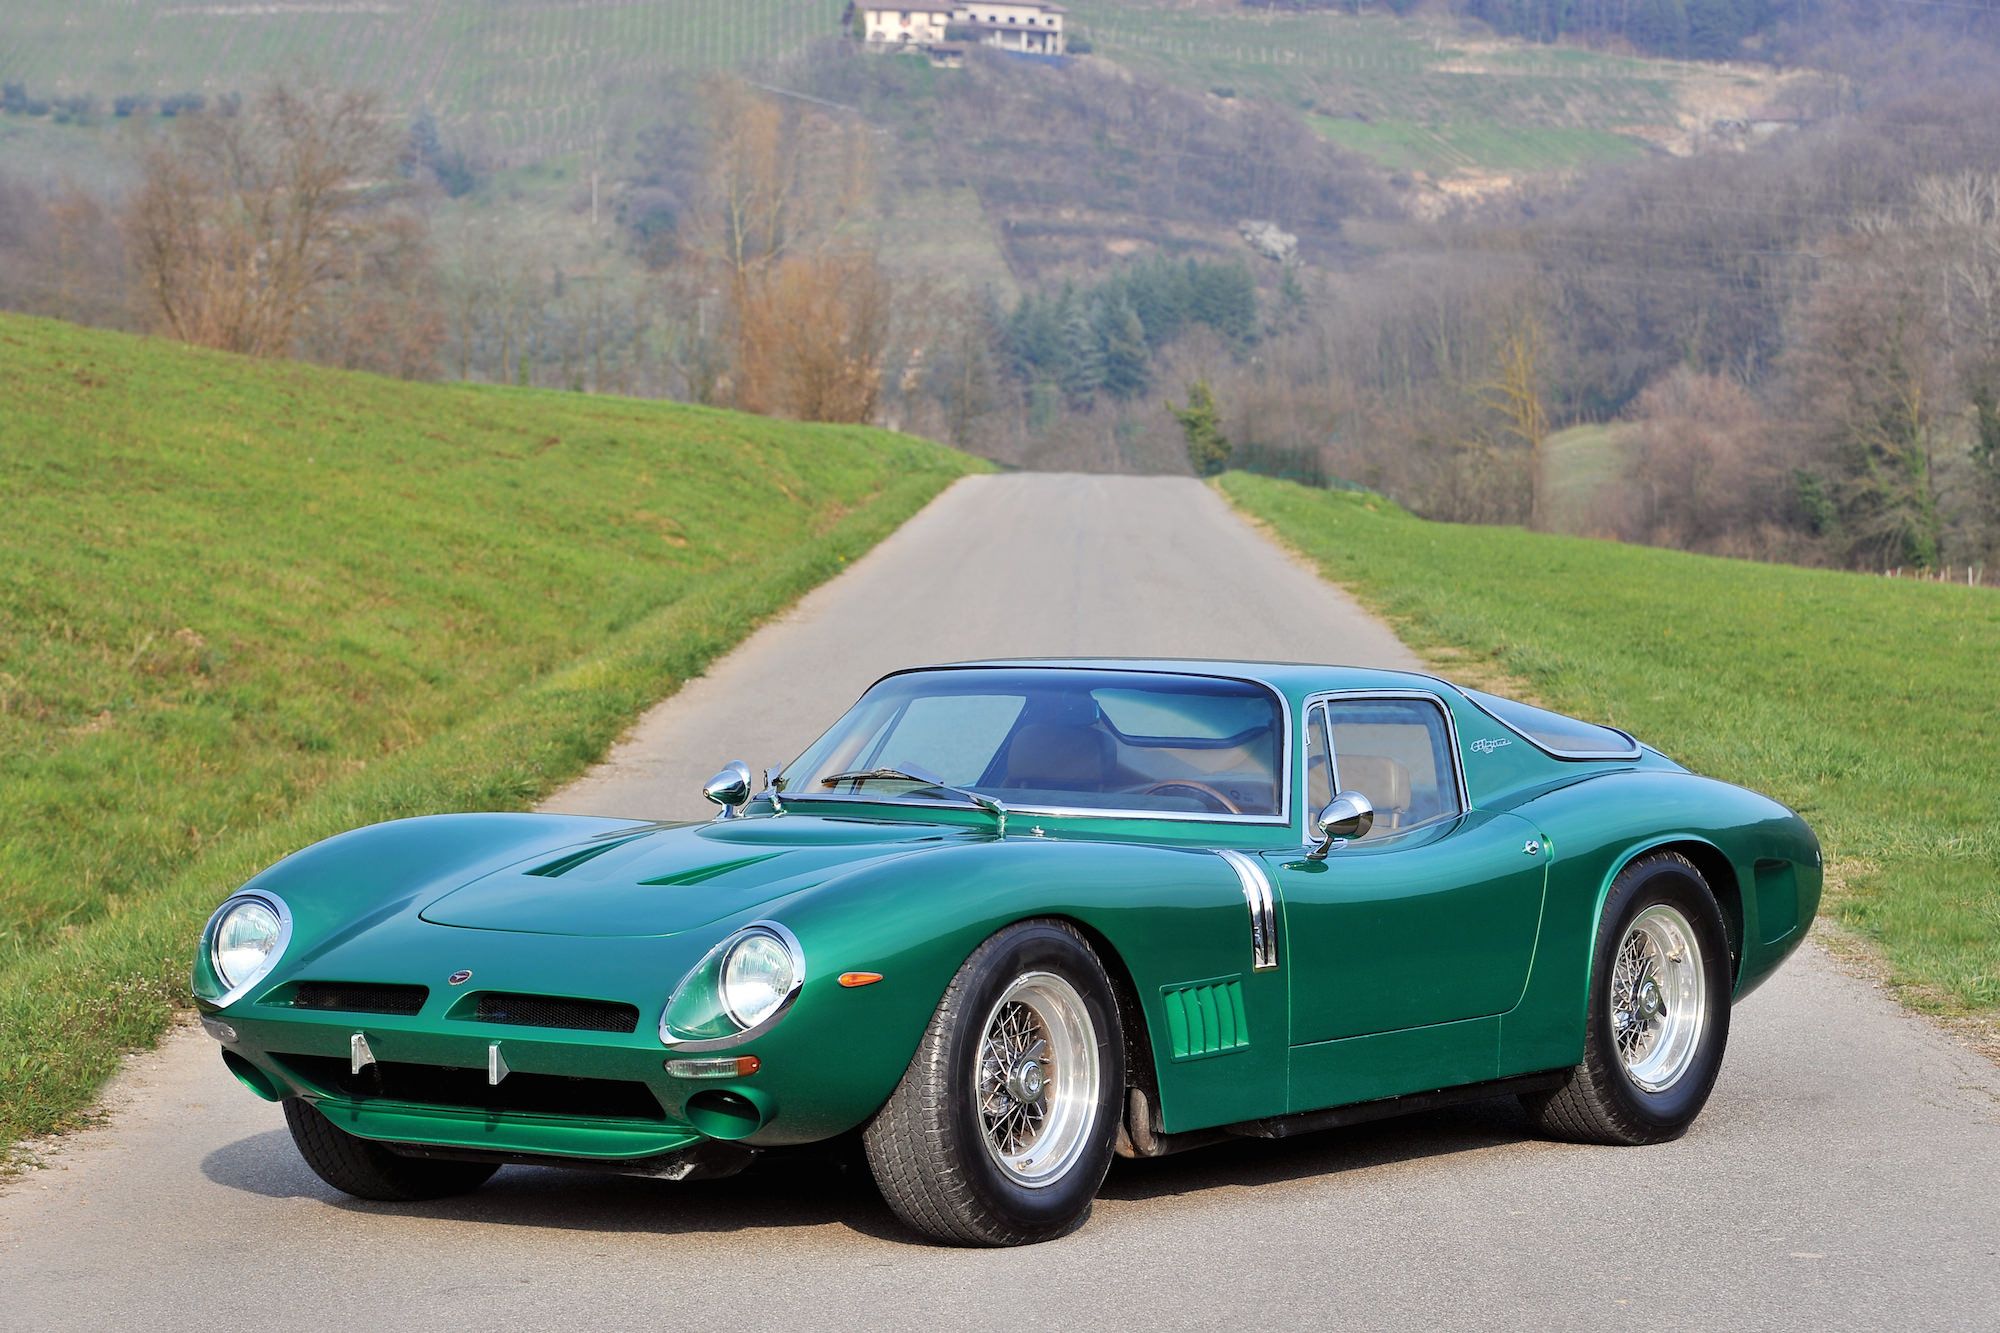 Bizzarrini 5300 GT Strada in the middle of the road